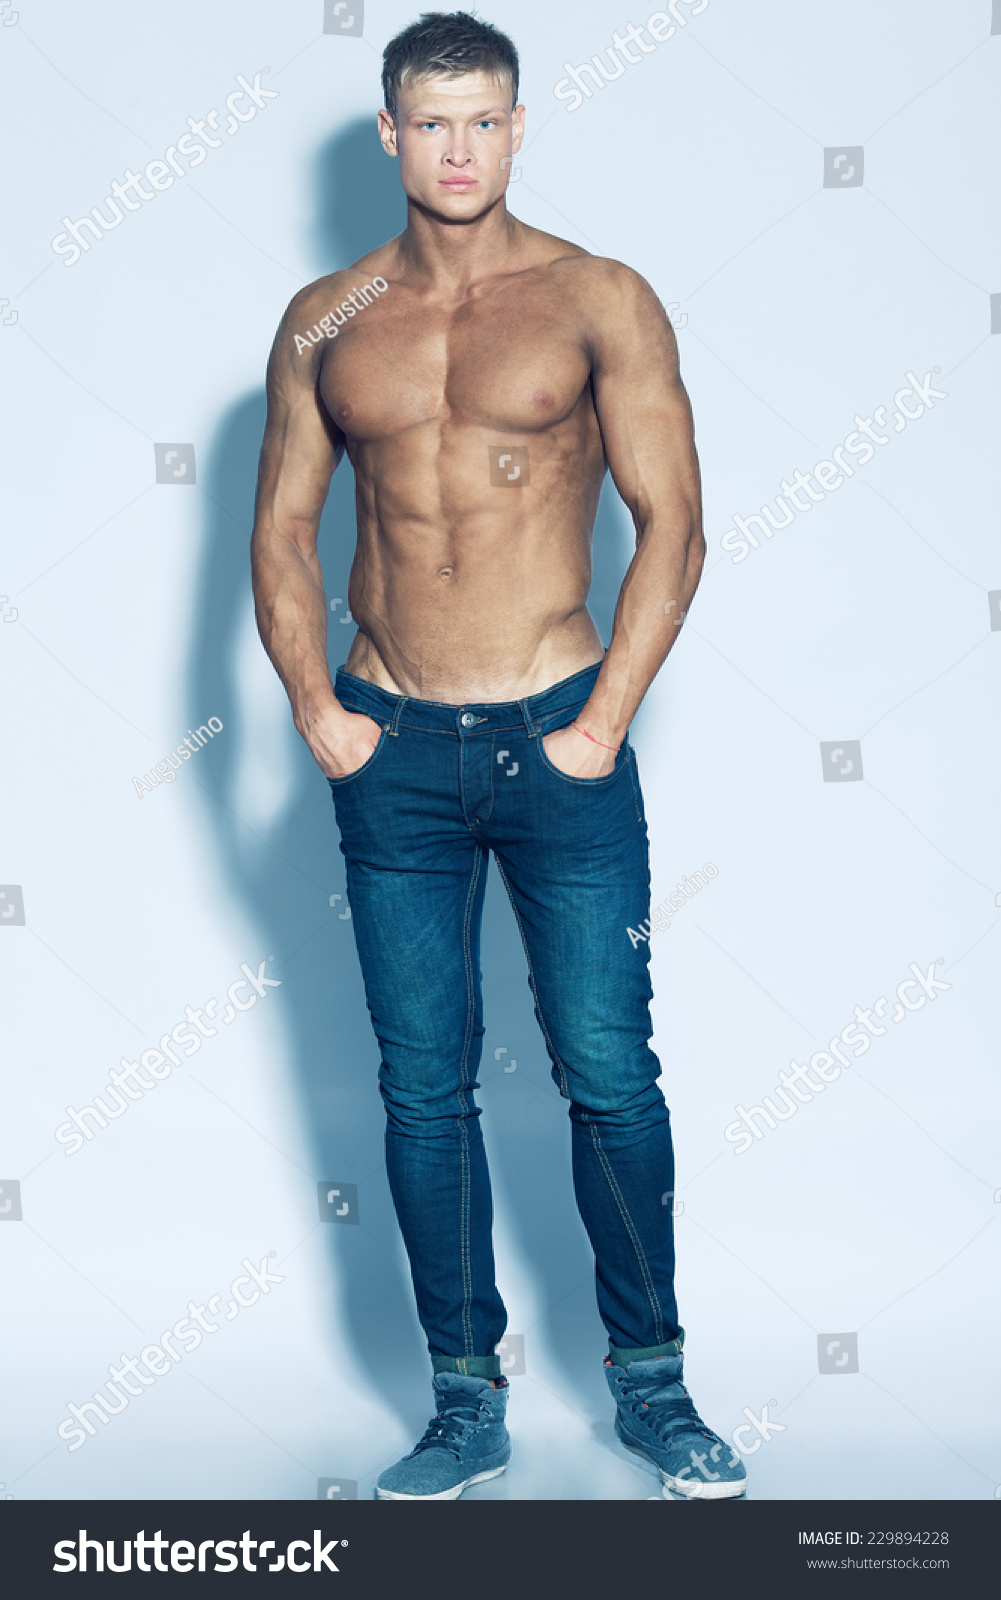 Male Beauty Fashion Concept Full Length Stock Photo Edit Now